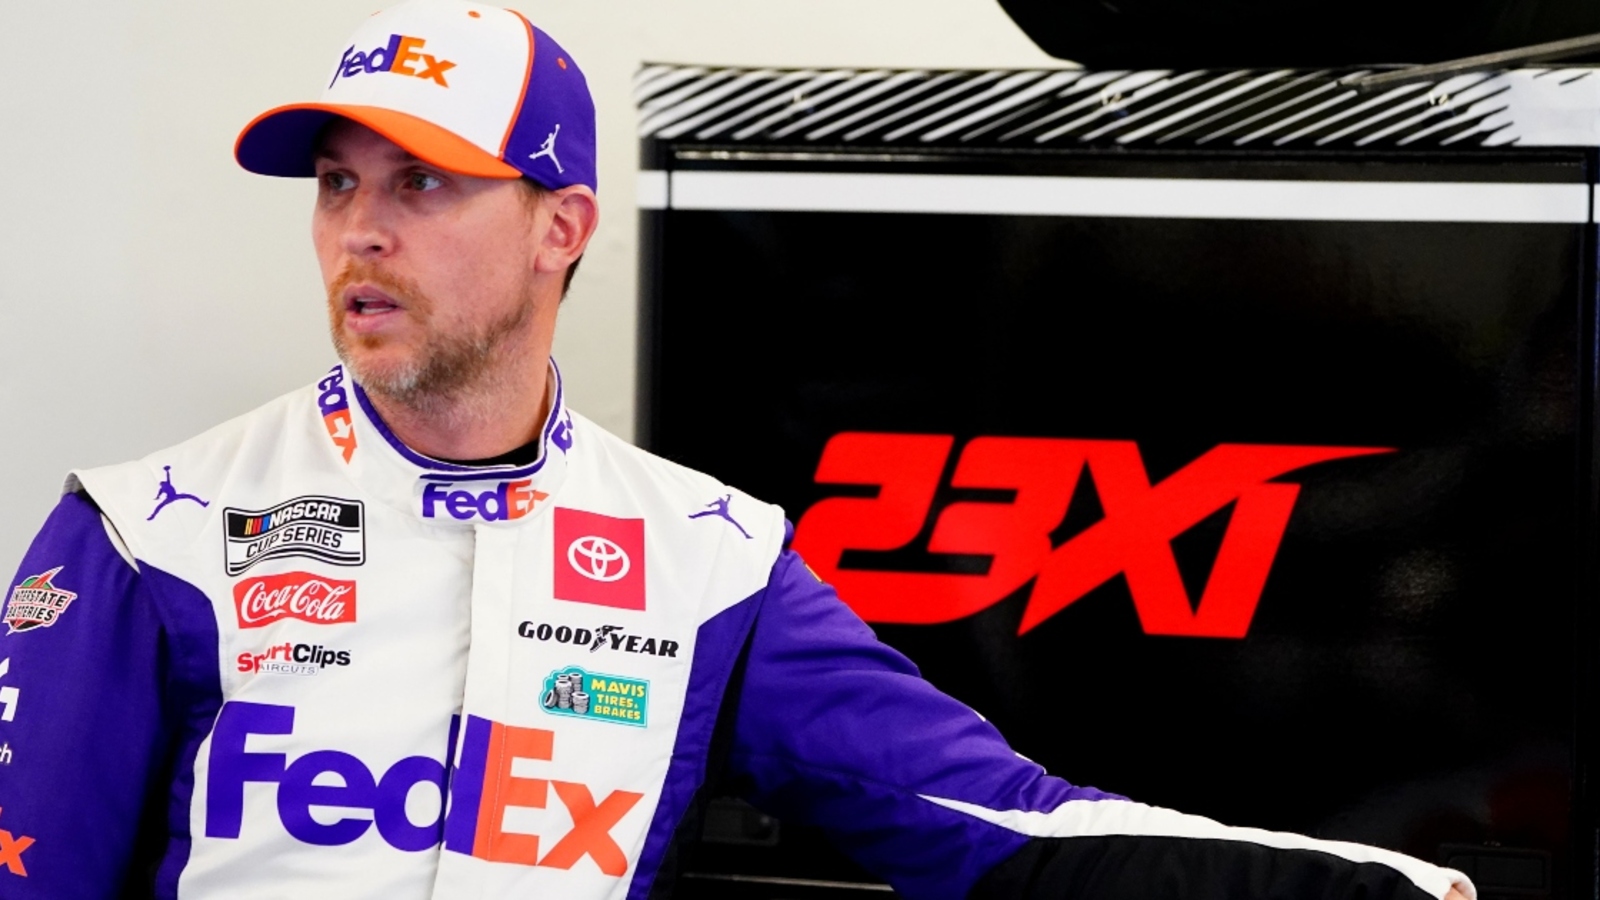 Denny Hamlin could race for 23XI Racing full-time before retiring from NASCAR